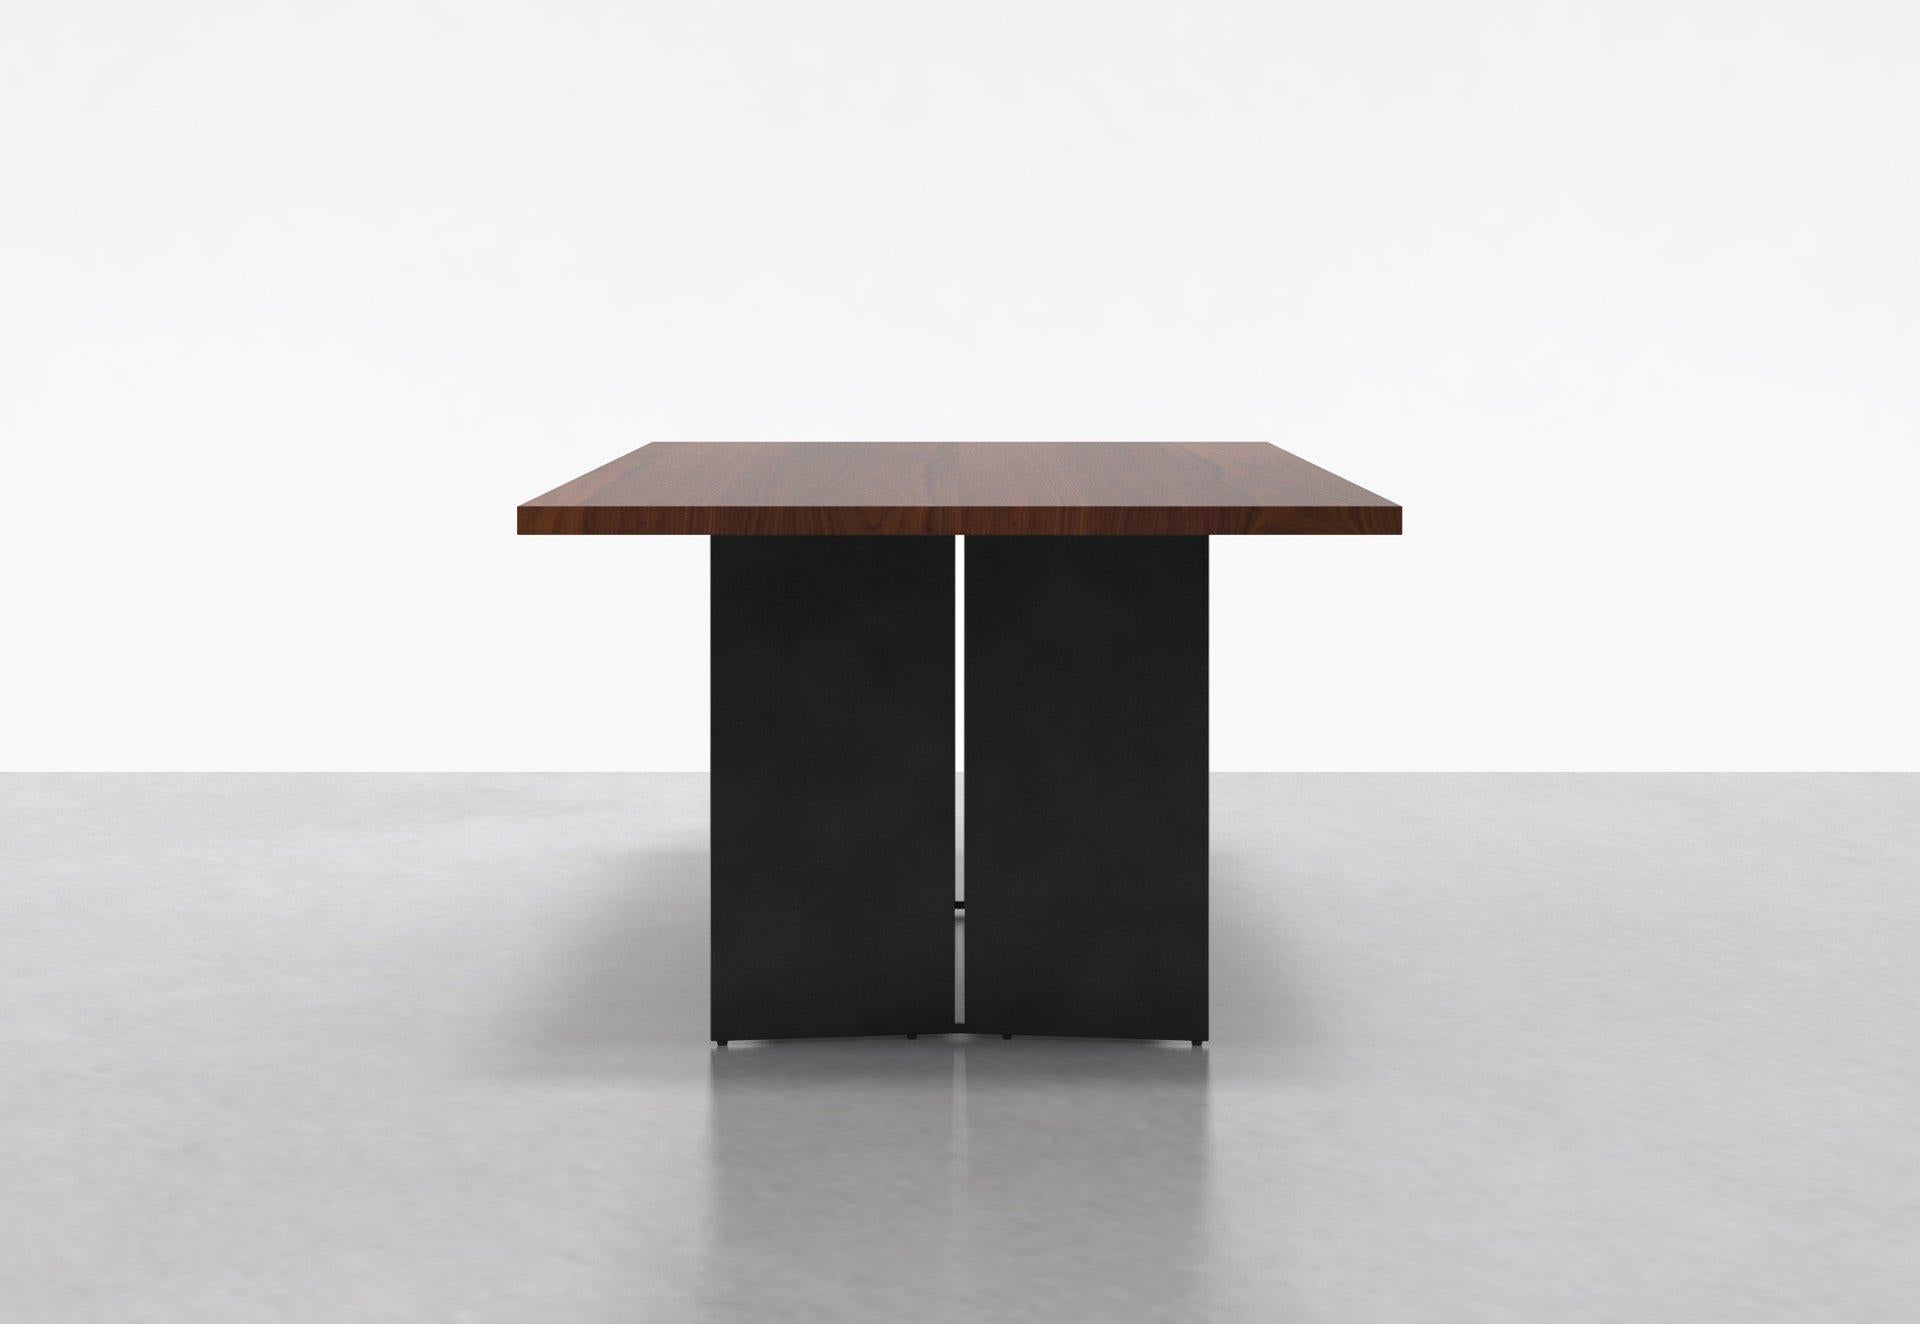 Two angled steel plates stand side by side on each end of our Milo Table, creating a clean contemporary form with ample clearance for legs and feet. The solid wood surface sits elegantly atop the base, creating a true sculptural element in any